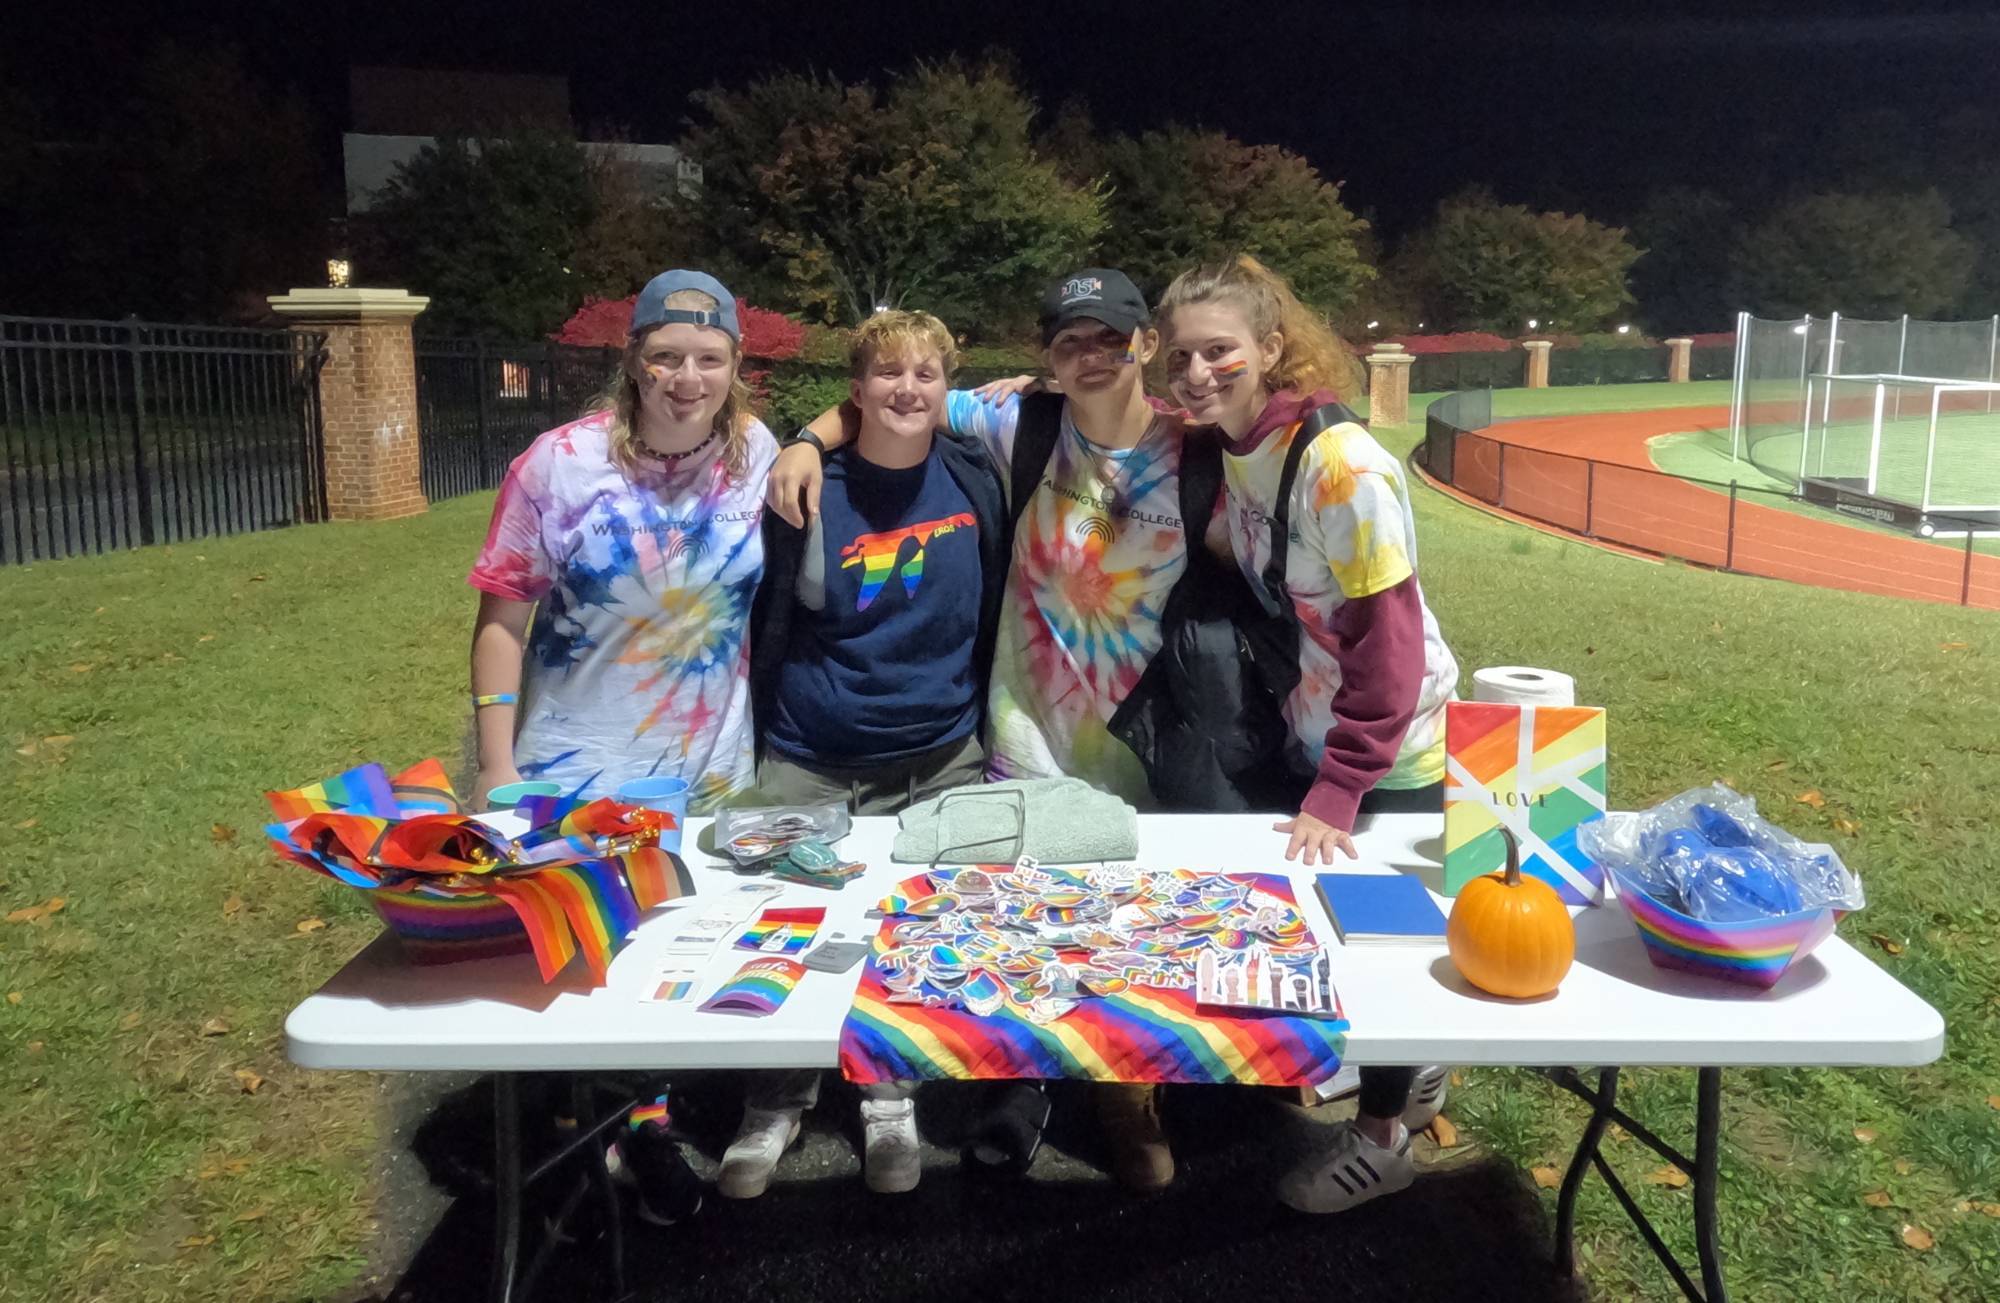 Four students at a Pride in Athletics table with materials for fans at a Washington College soccer game